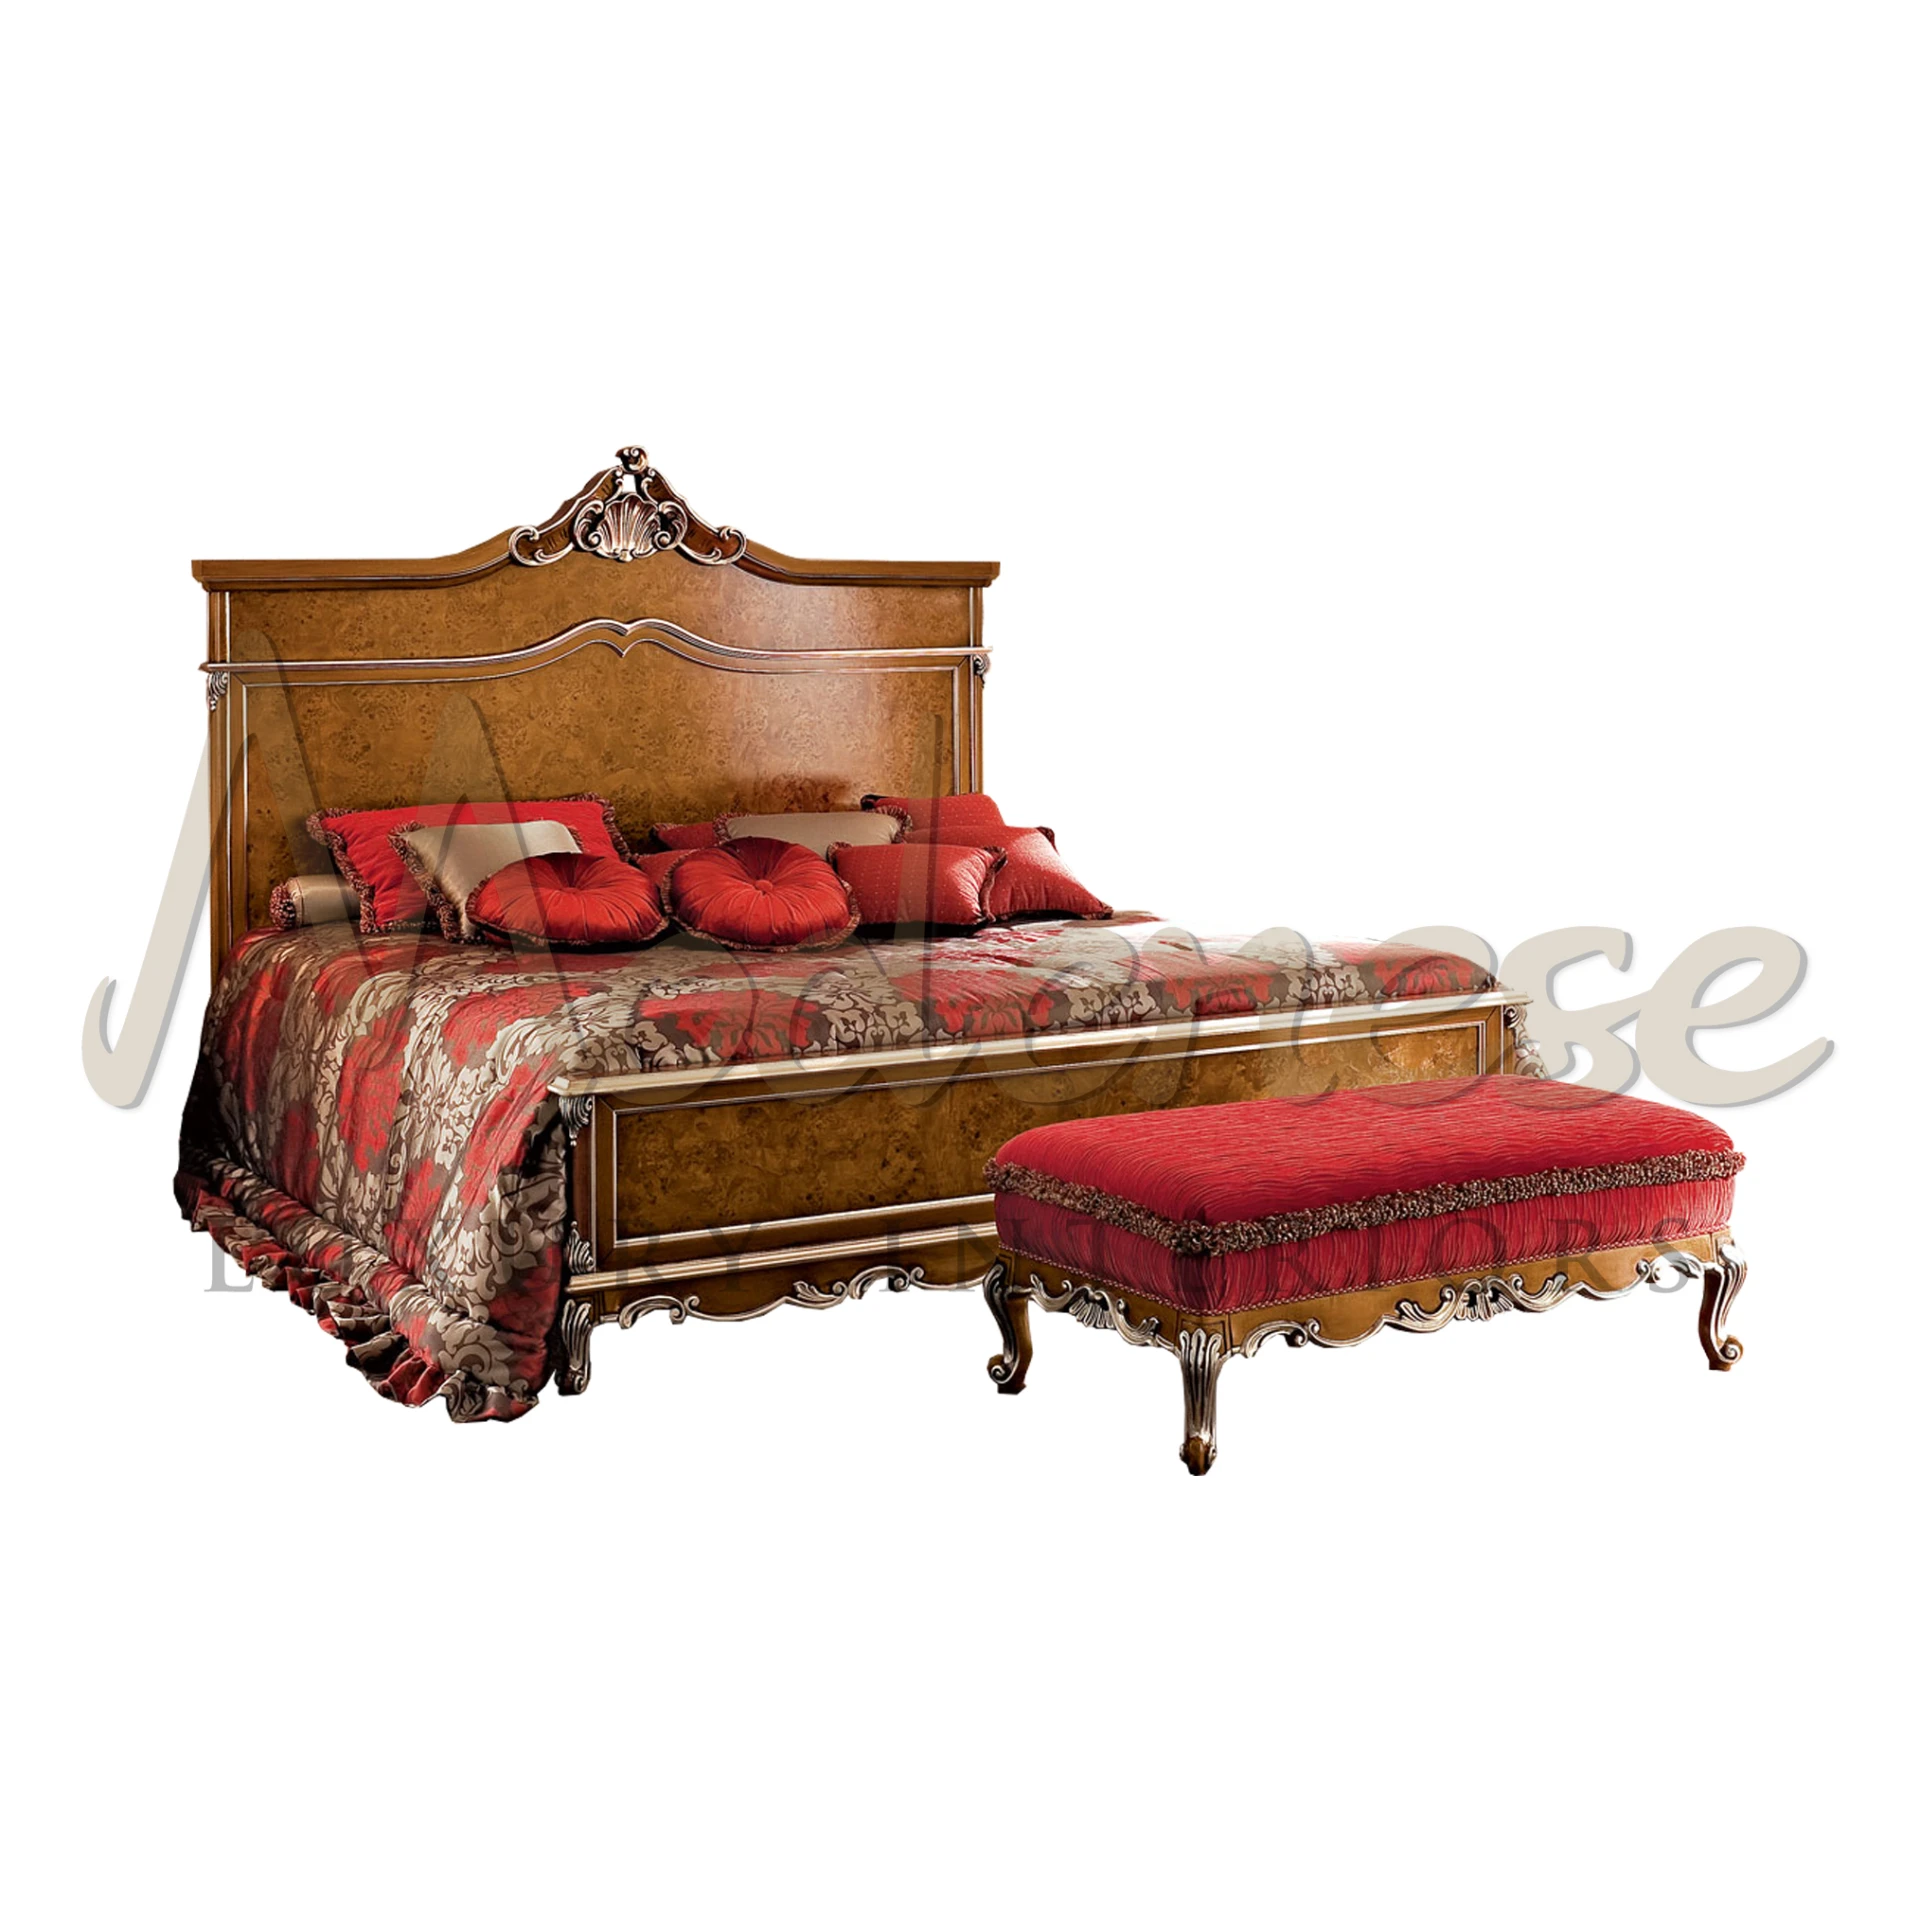 A classic wooden bed produced by Modenese Furniture Manufacturer with a curved headboard and rich red bedding, accompanied by a matching ornate bench.